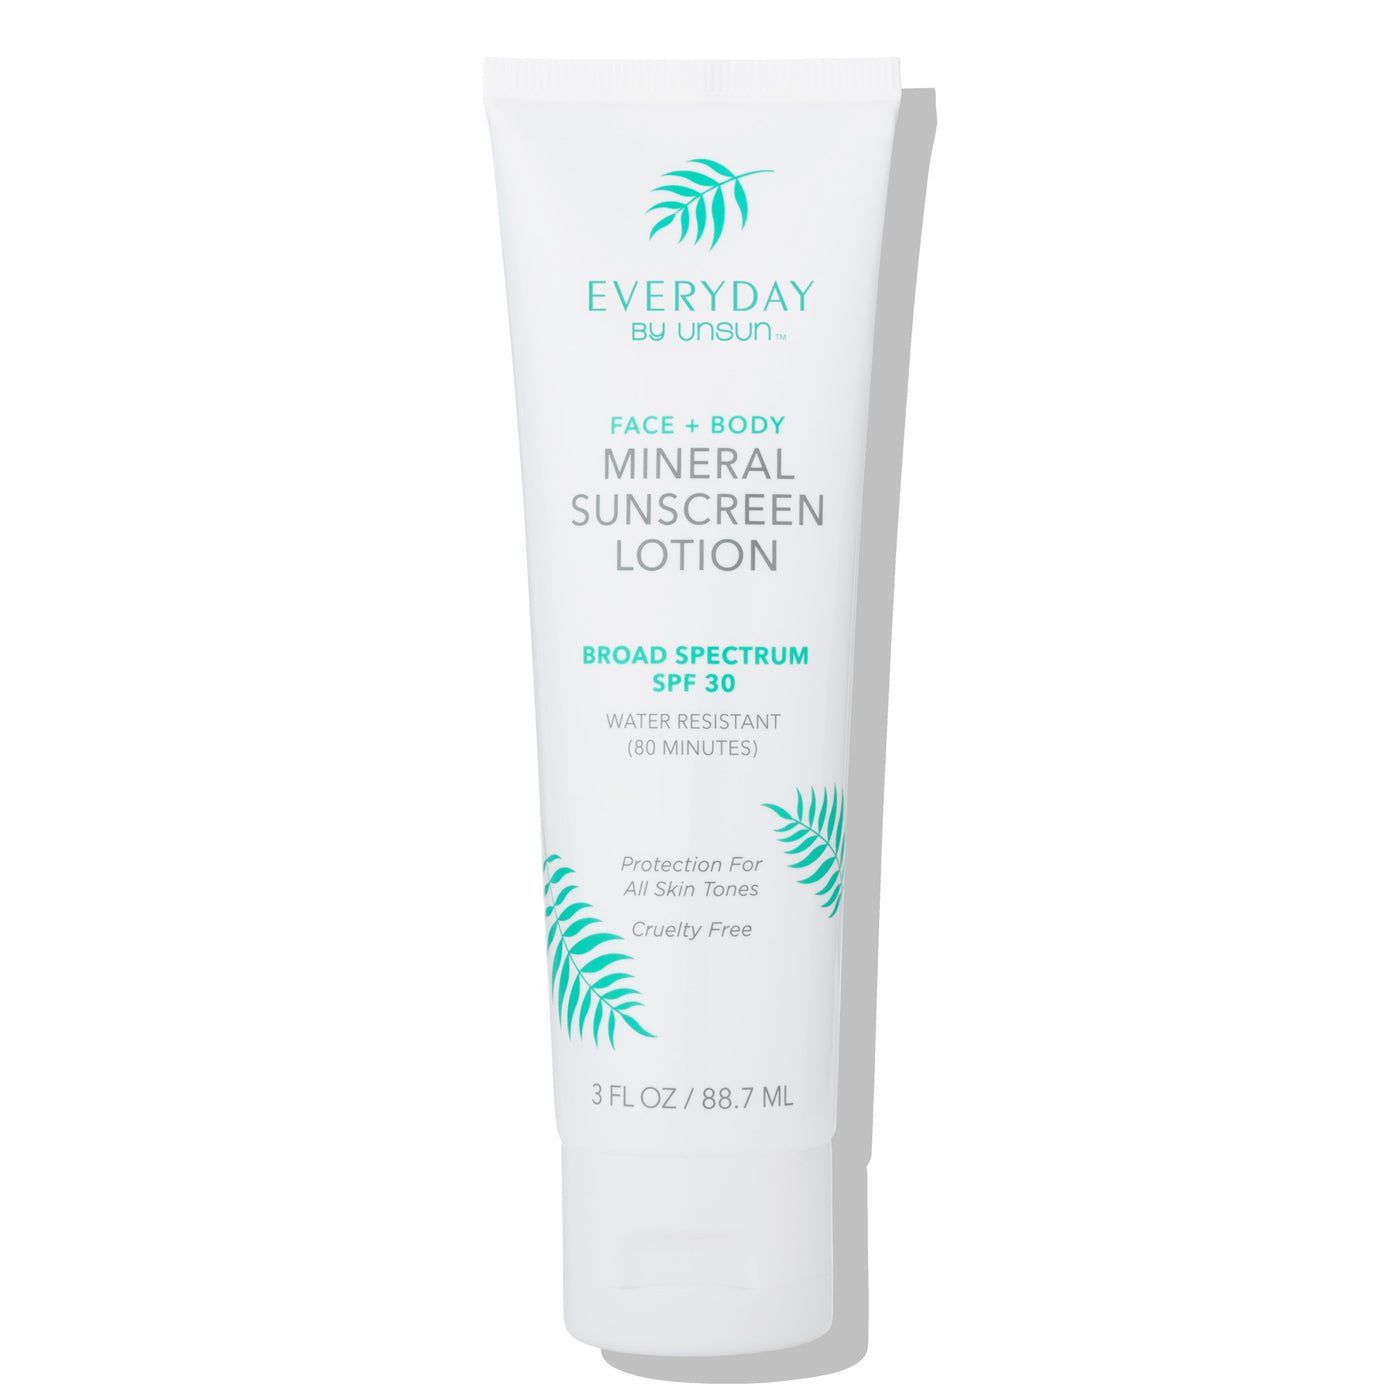 EVERYDAY Face + Body Mineral SPF30 Lotion